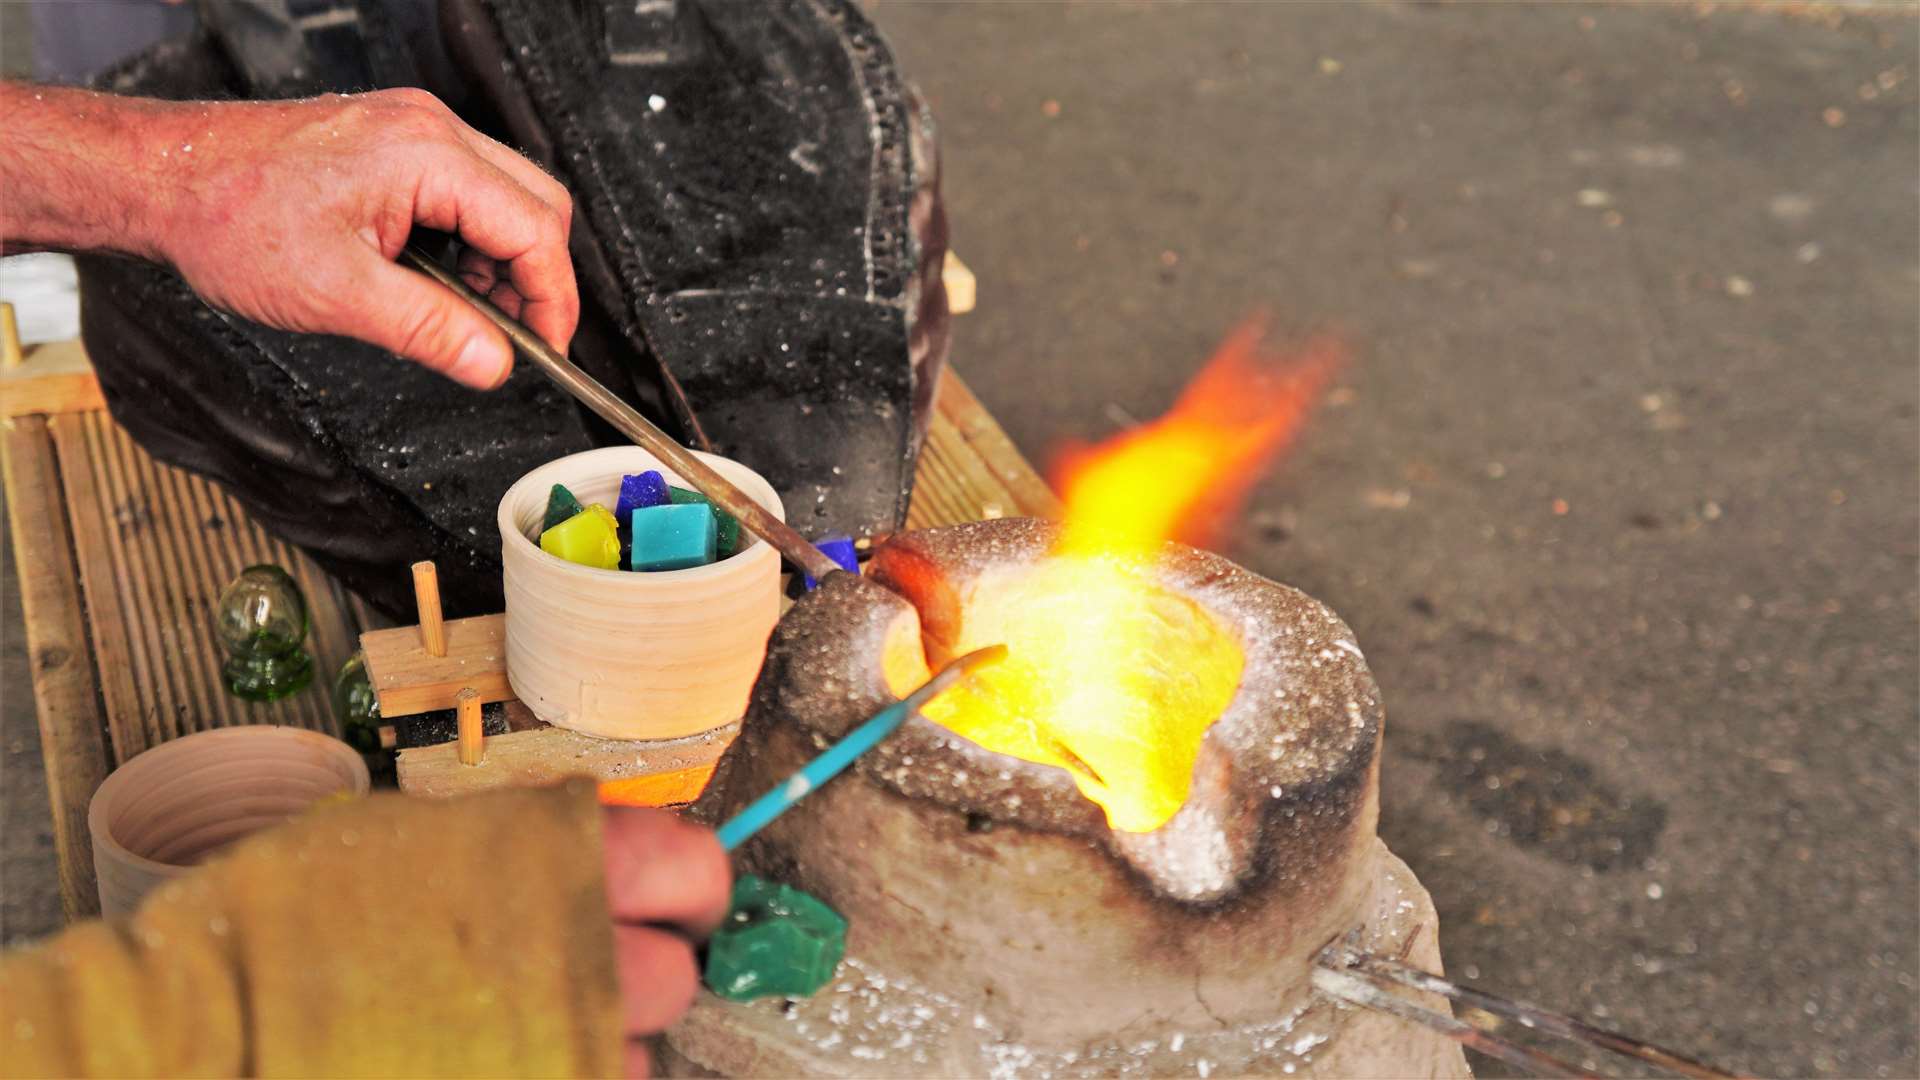 Glass artist Michael Bullen had a special furnace and was trying to recreate the patterned glass bead recovered in an archaeological dig at Swartigill this year. Picture: DGS